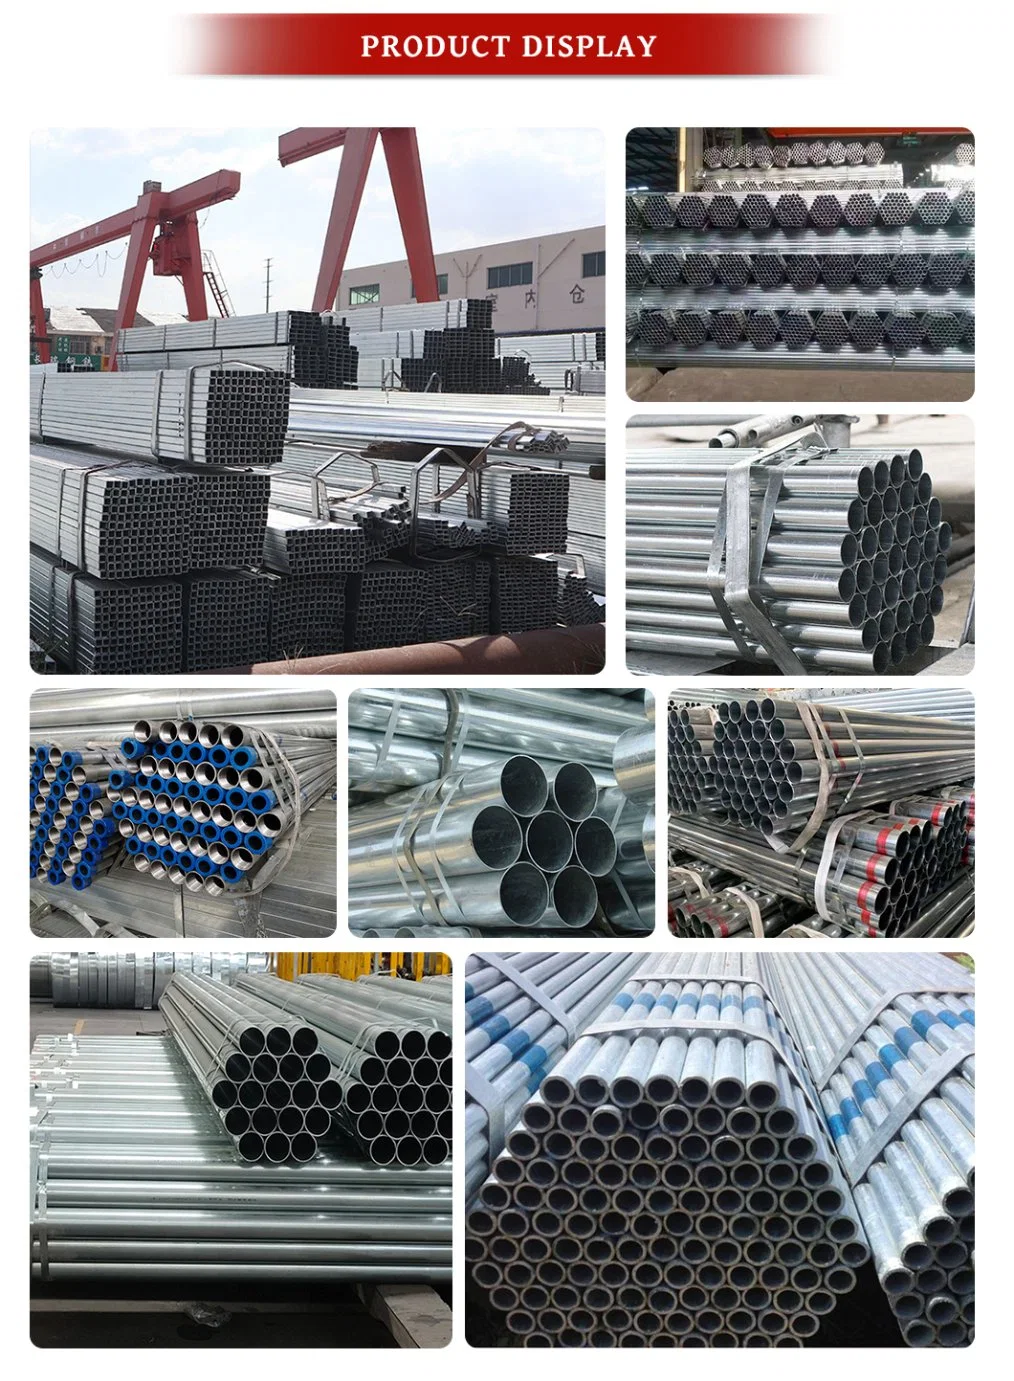 High-Quality Galvanized Steel Pipe for Construction Projects